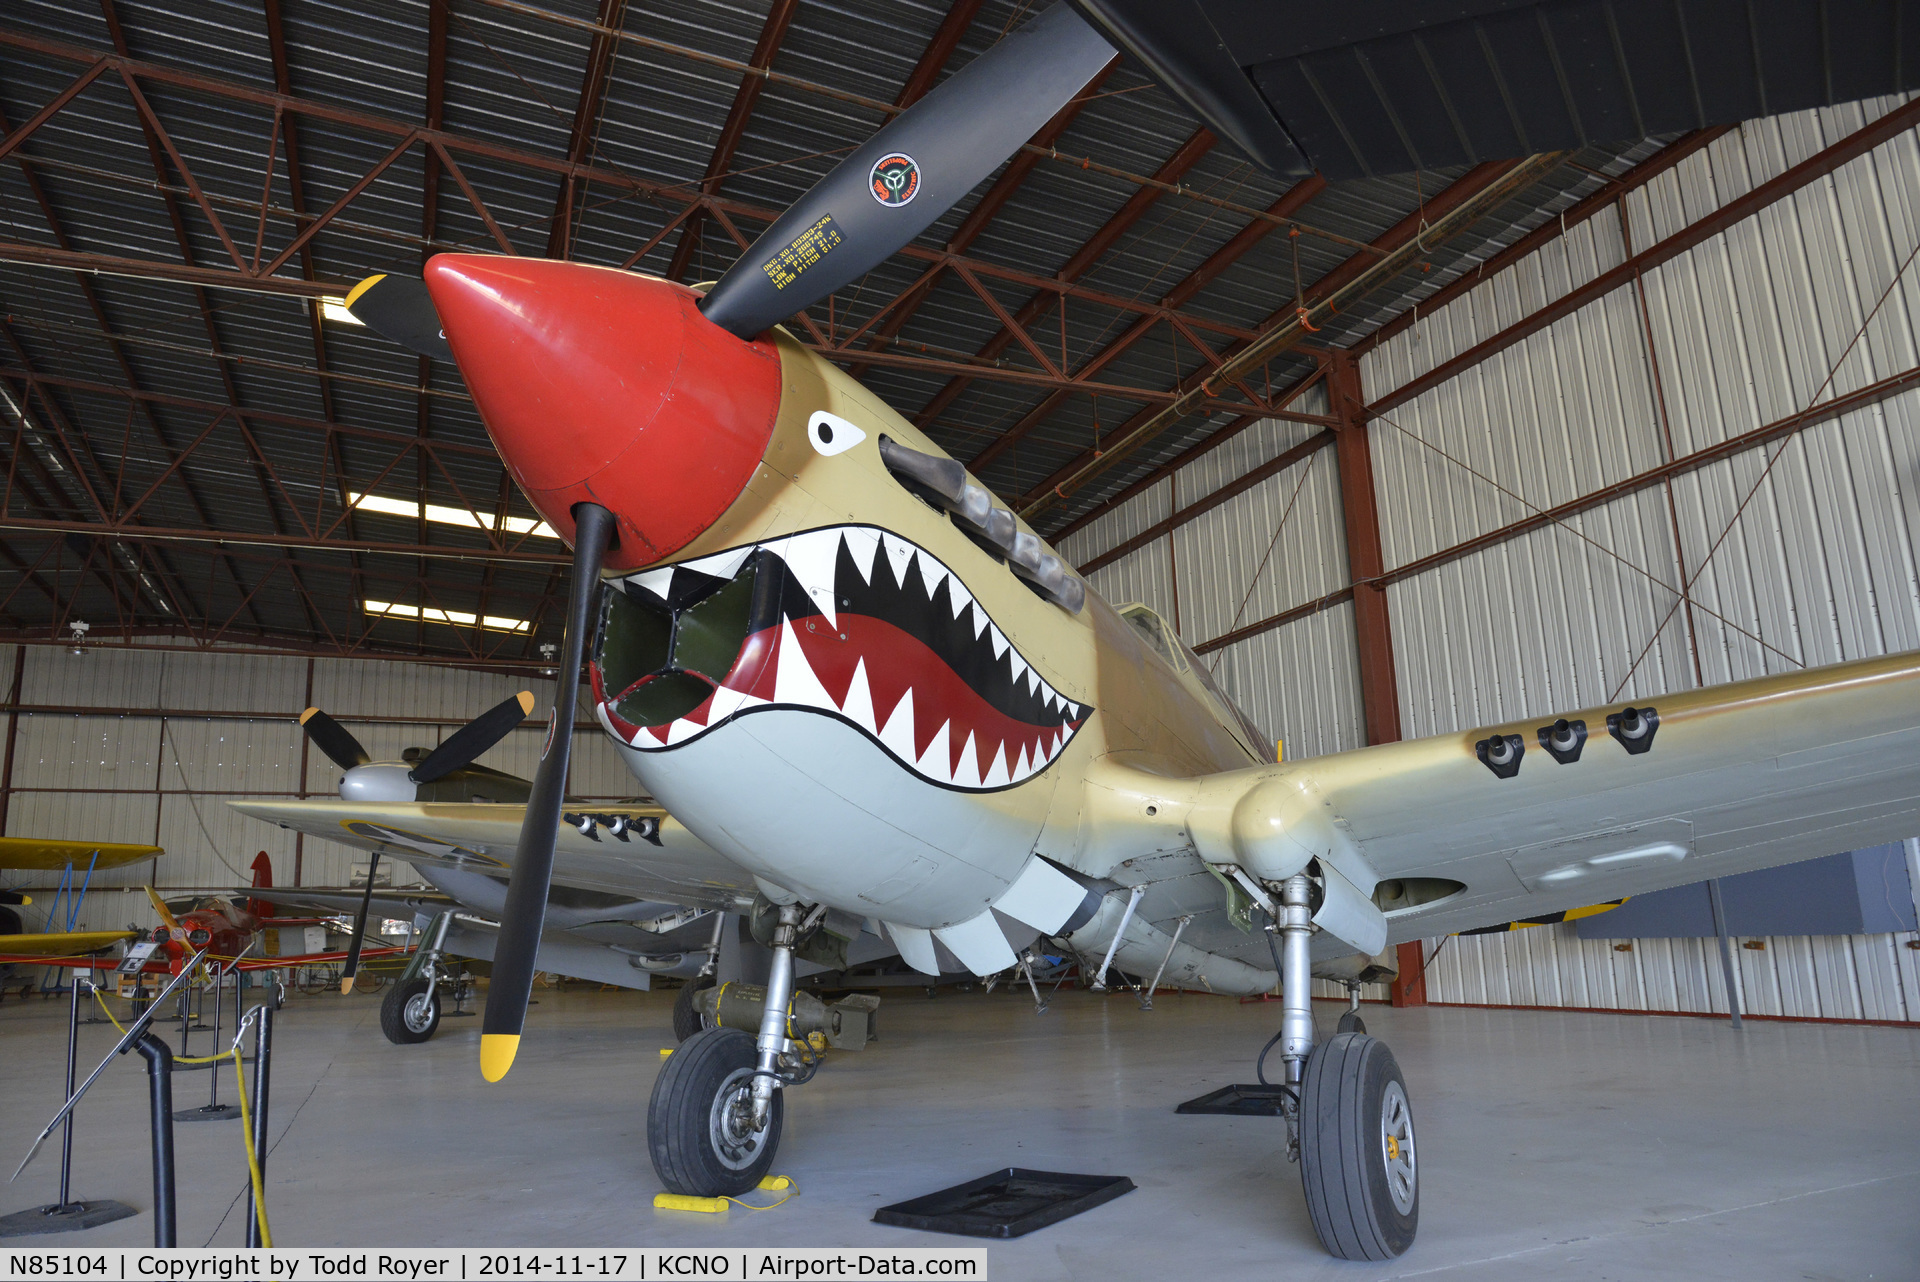 N85104, Curtiss P-40N-5CU Kittyhawk C/N 28954/F858, At the Planes of Fame Chino location